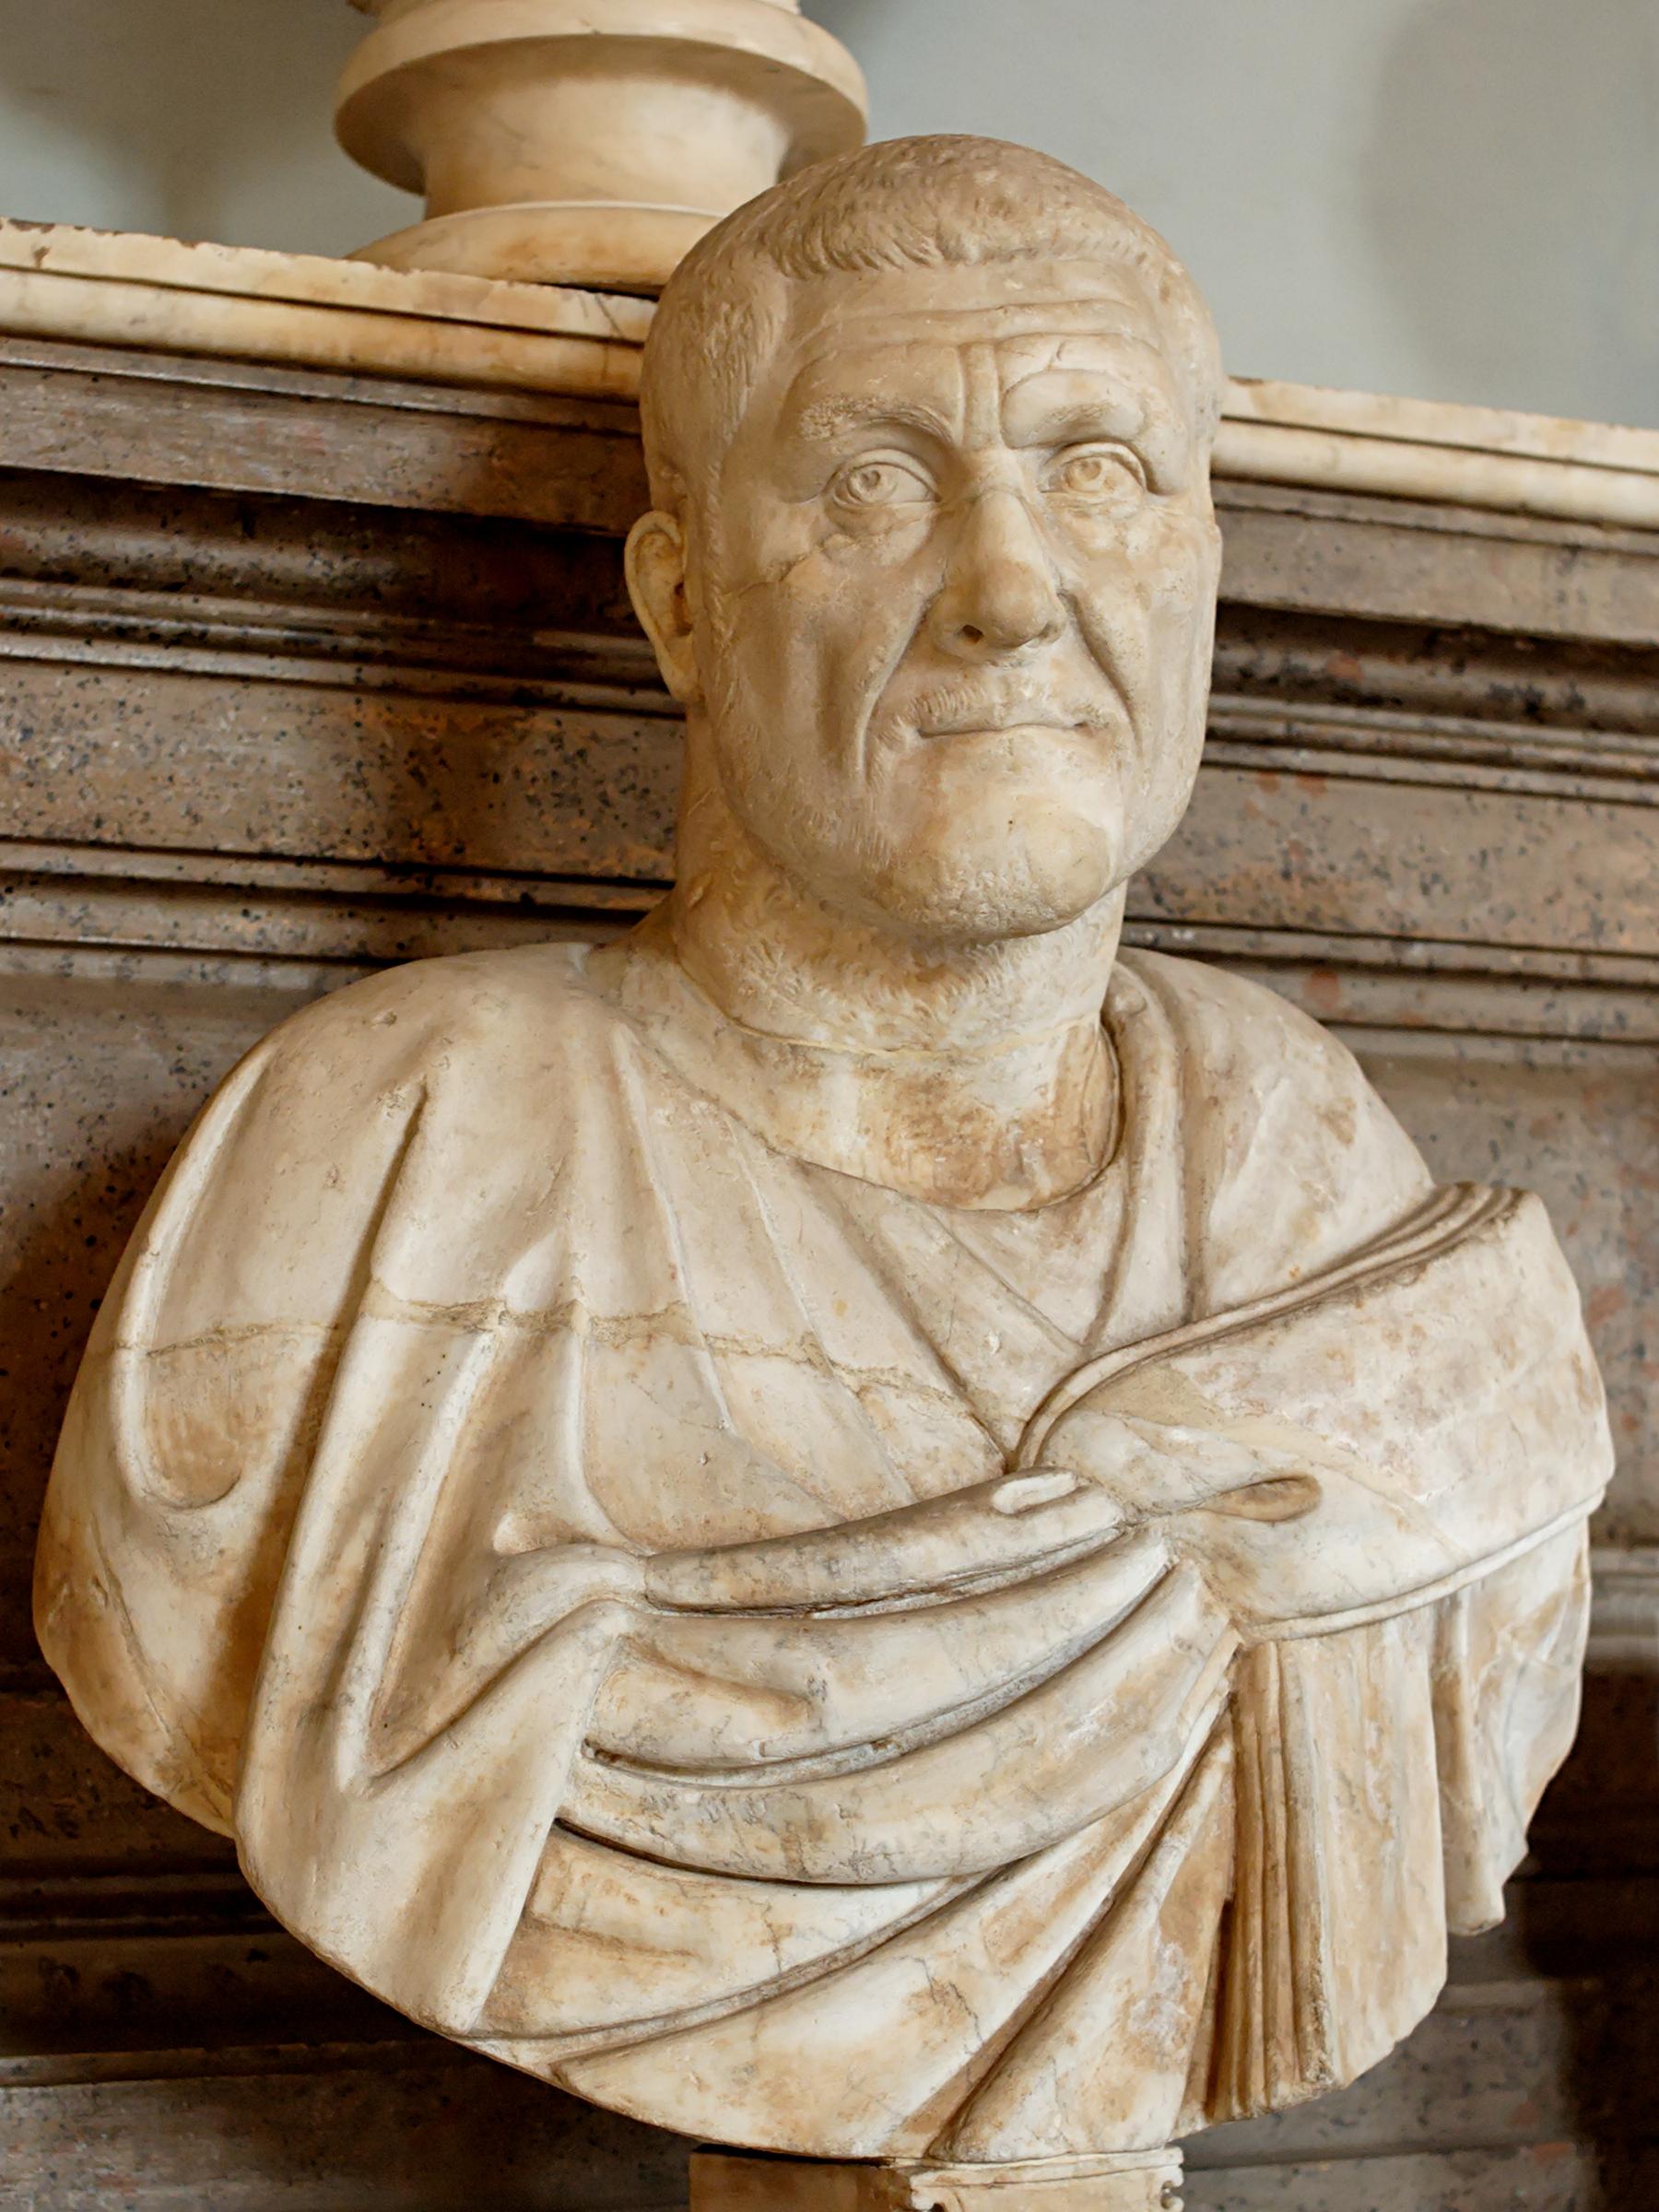 Maximinus Thrax reigned c. March 235 – June 238, the tallest roman emperor ever supposedly standing at 8 feet tall (244cm).jpeg